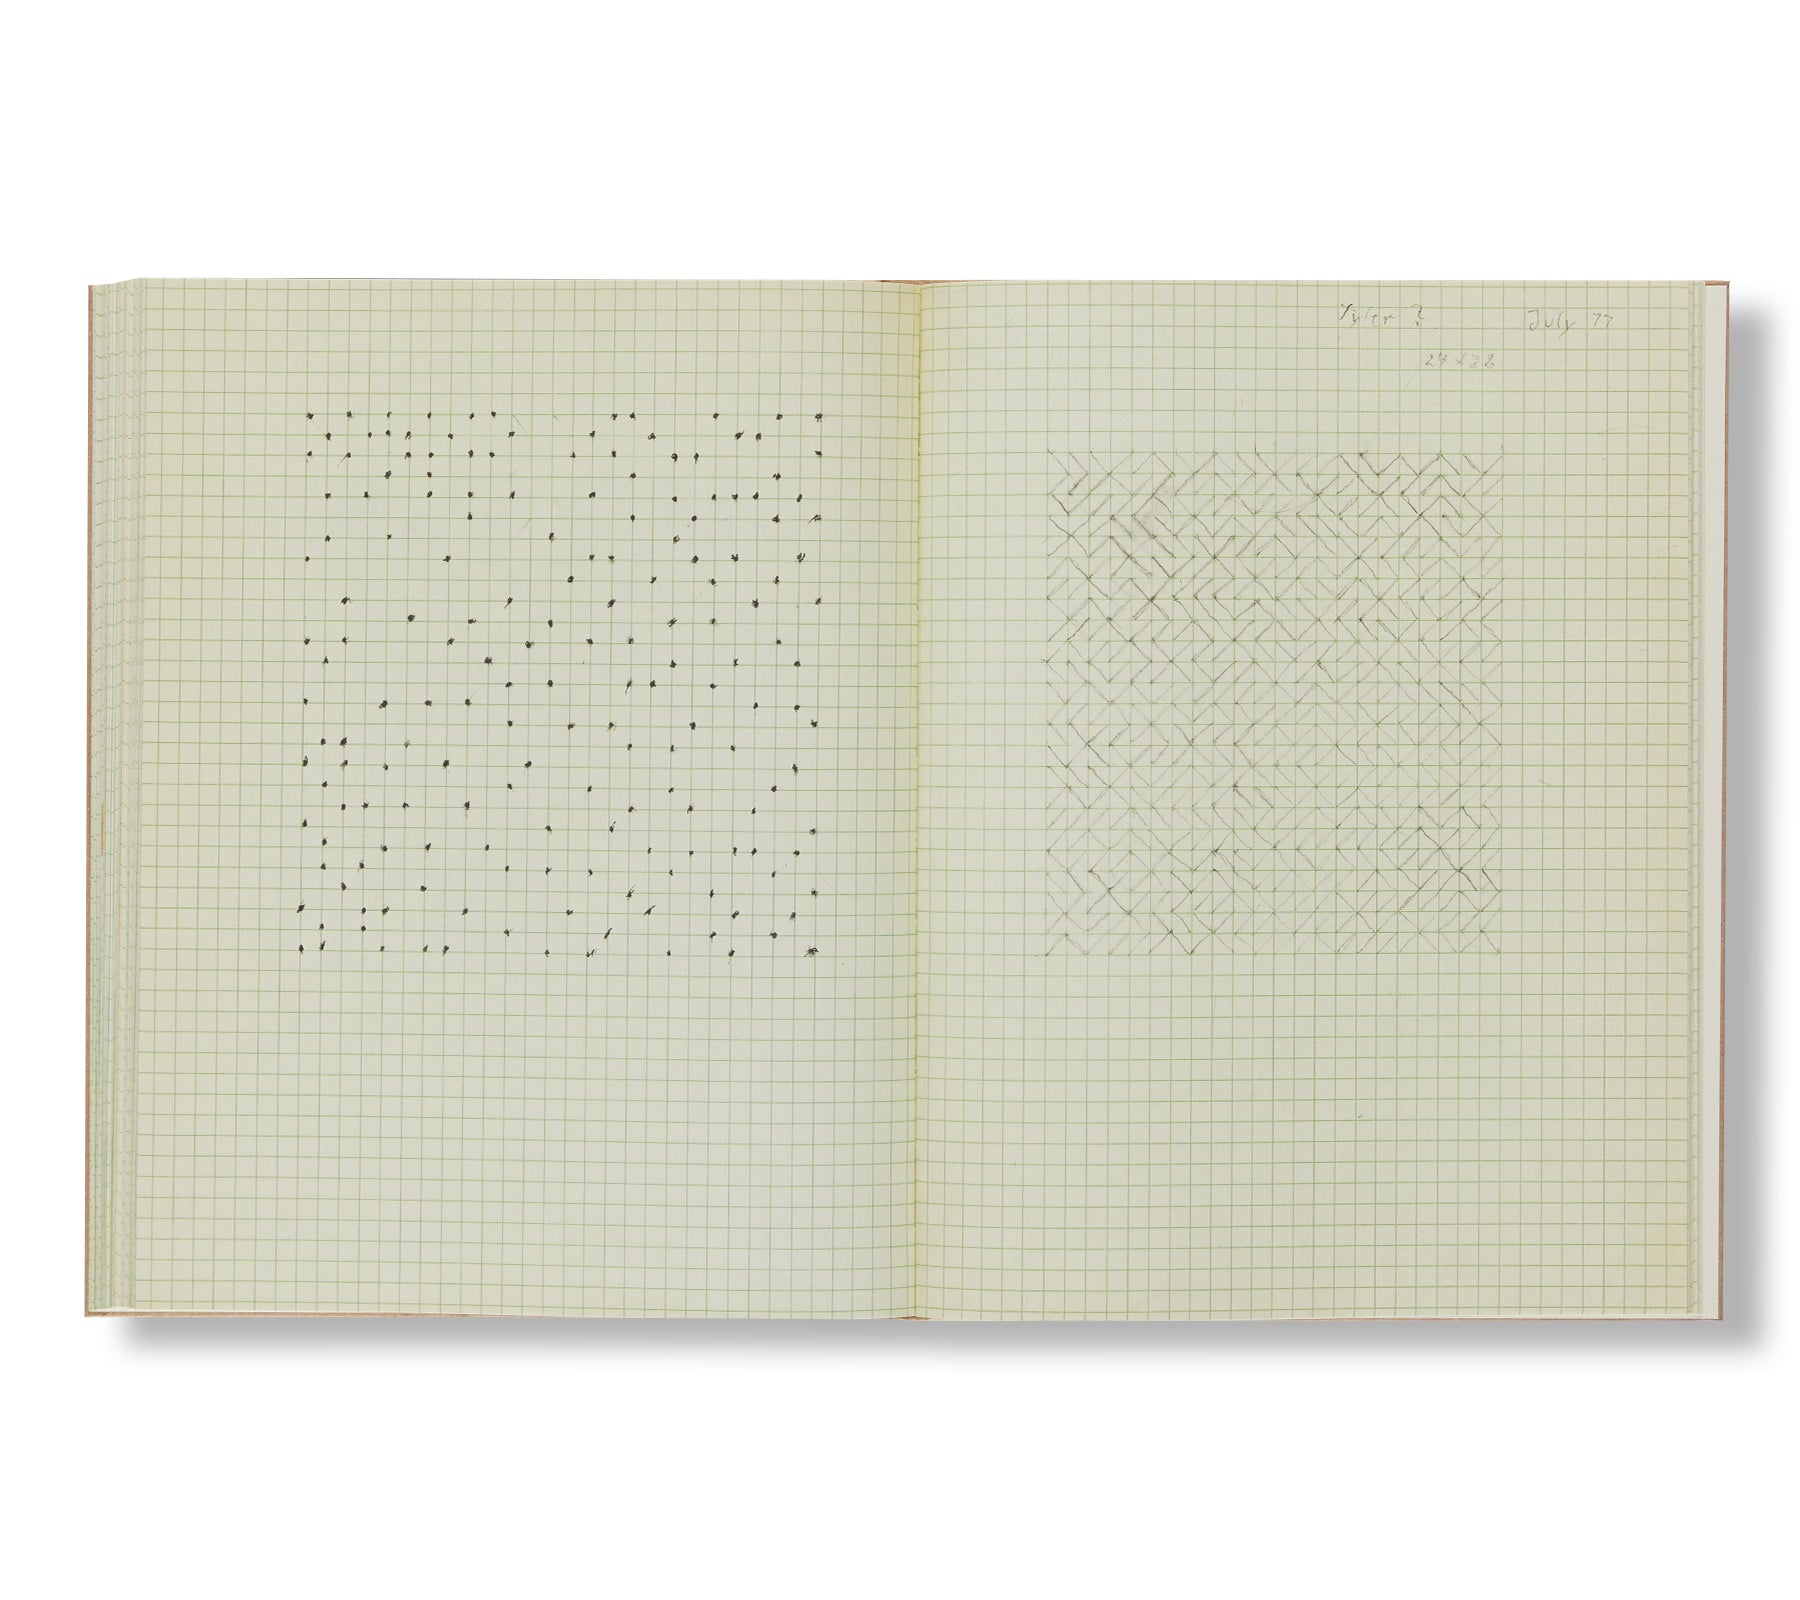 NOTEBOOK 1970–1980 by Anni Albers